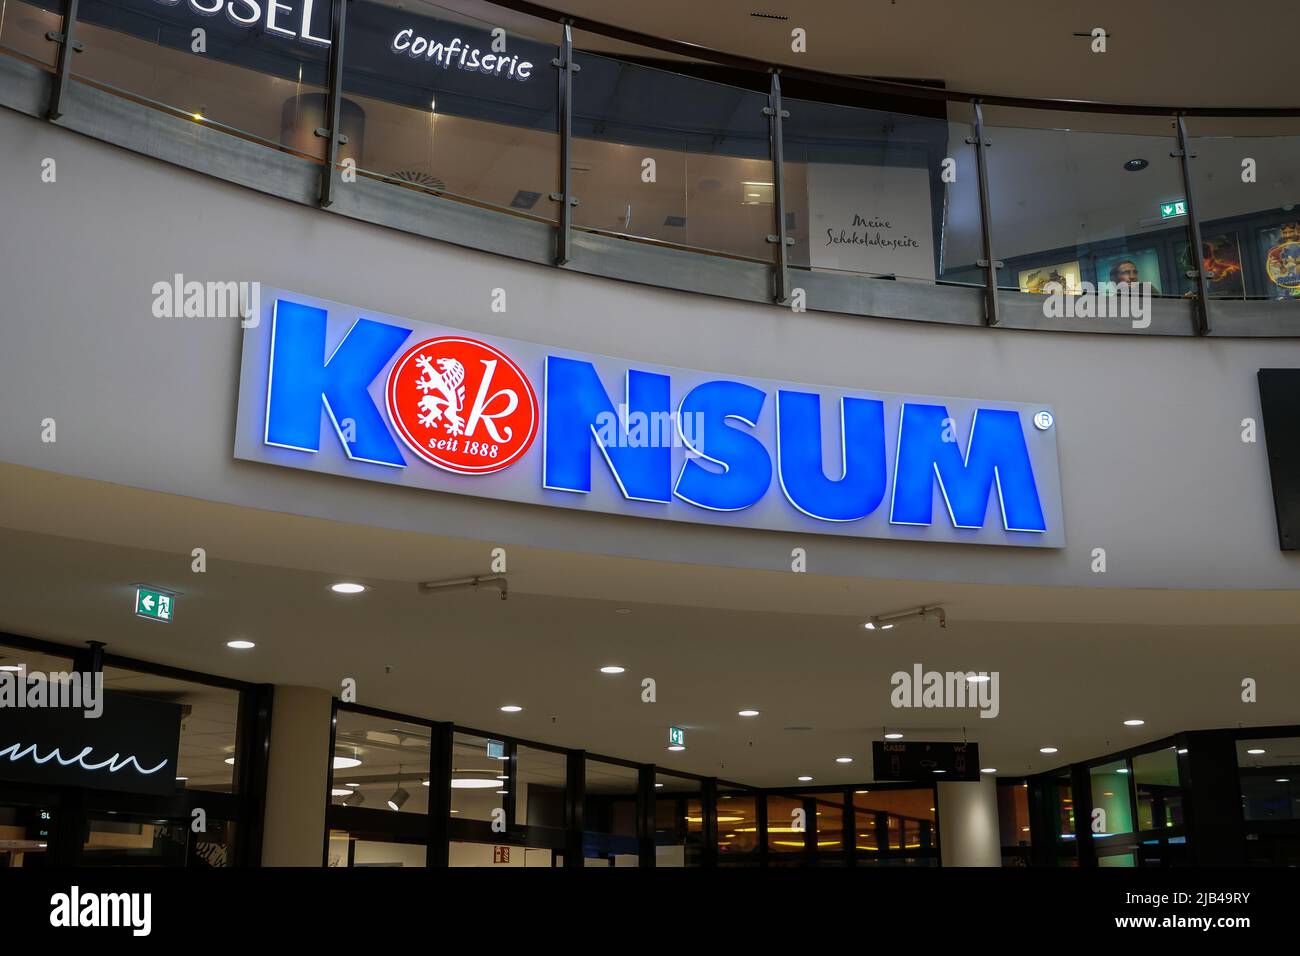 Konsum Dresden eG supermarket logo in a shopping mall. Traditional german groceries store. Illuminated sign on the inside wall in the interior. Stock Photo